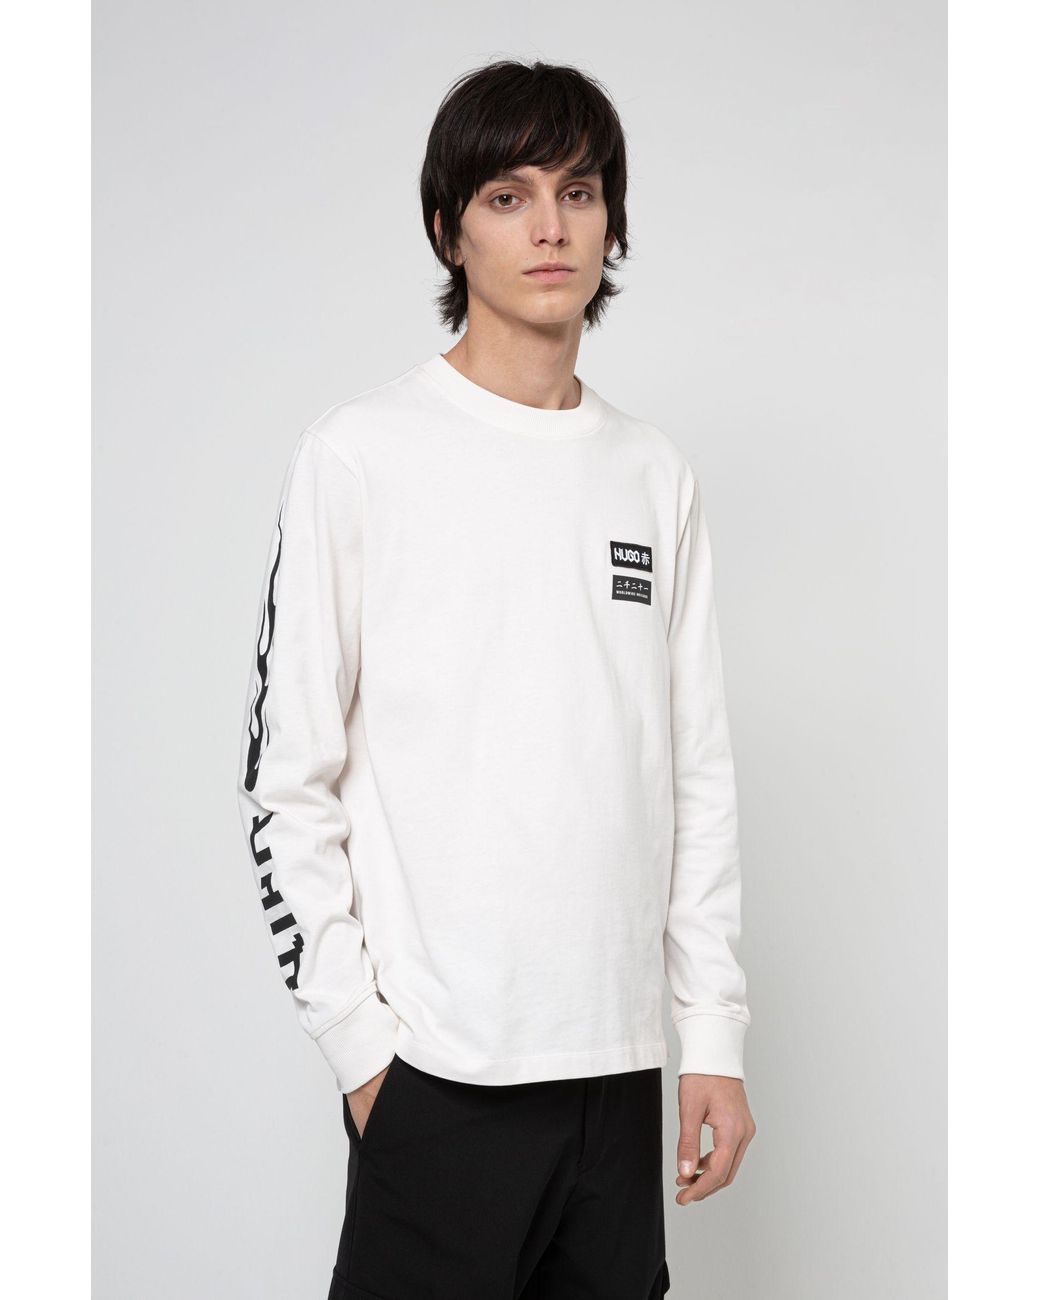 BOSS by Hugo Boss Long Sleeved Cotton T Shirt With Motorcycle Inspired ...